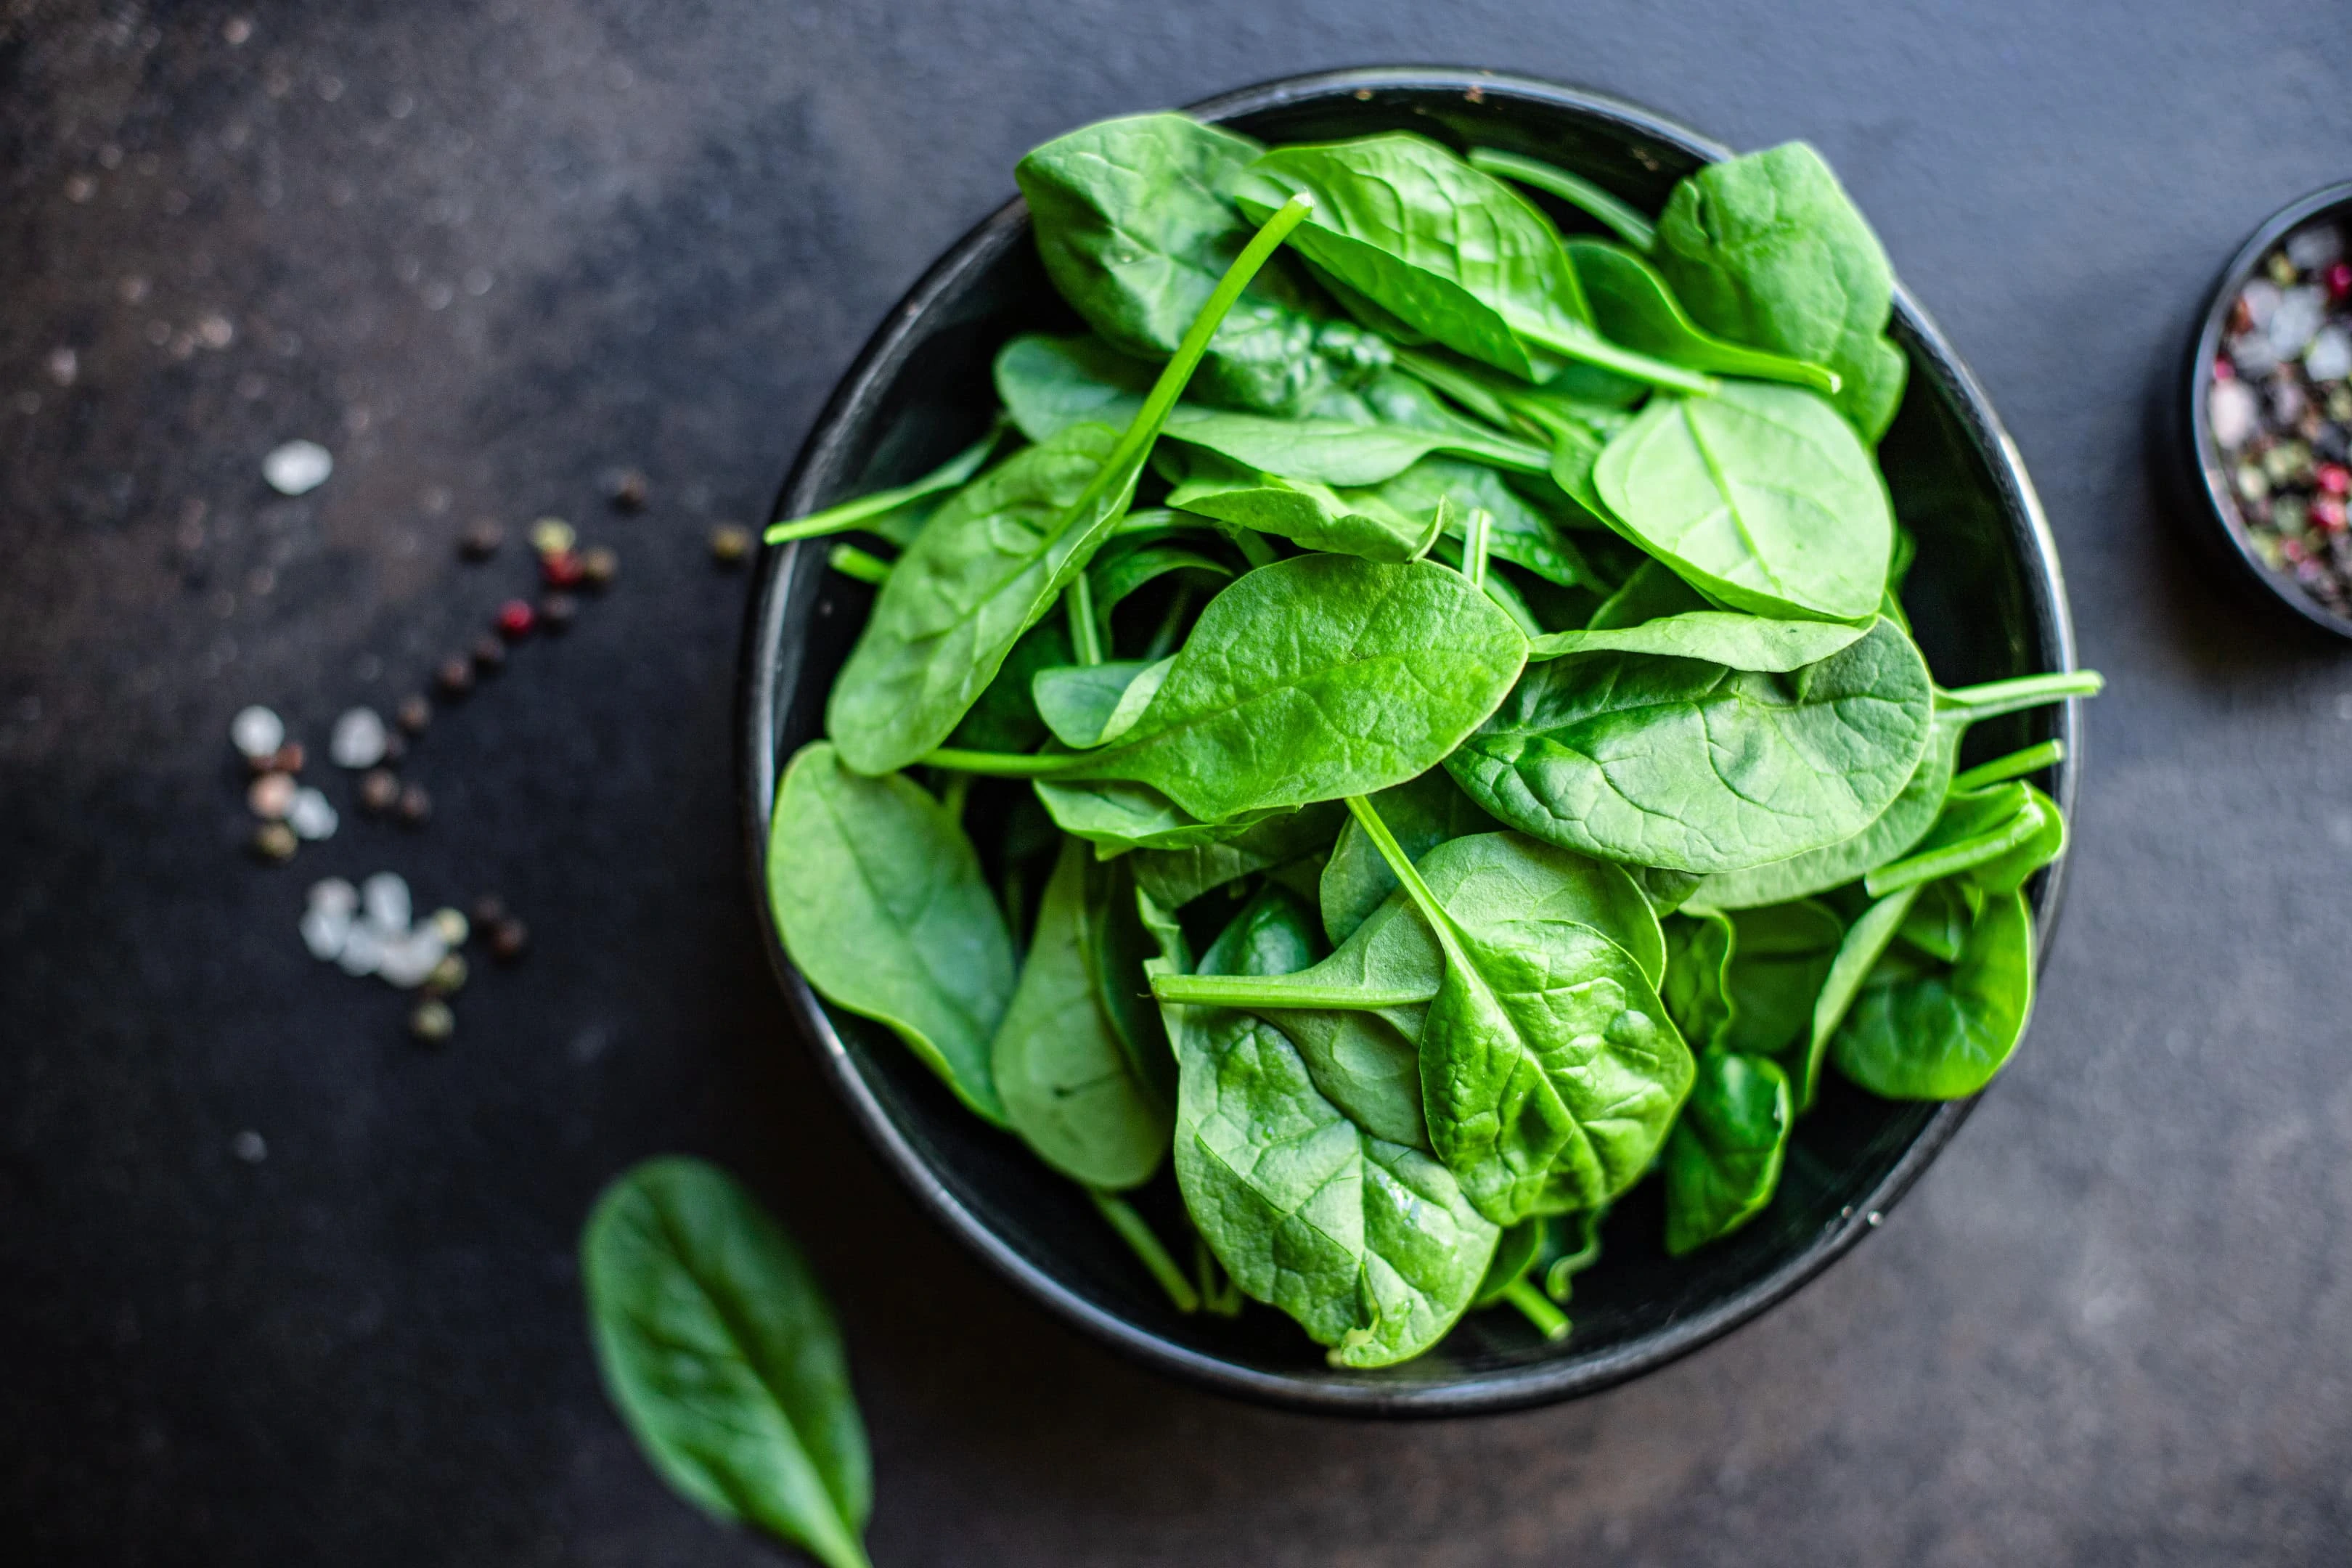 Fresh leafy greens. Leafy greens is one of our foods to eat and avoid when you have swollen lymph nodes.